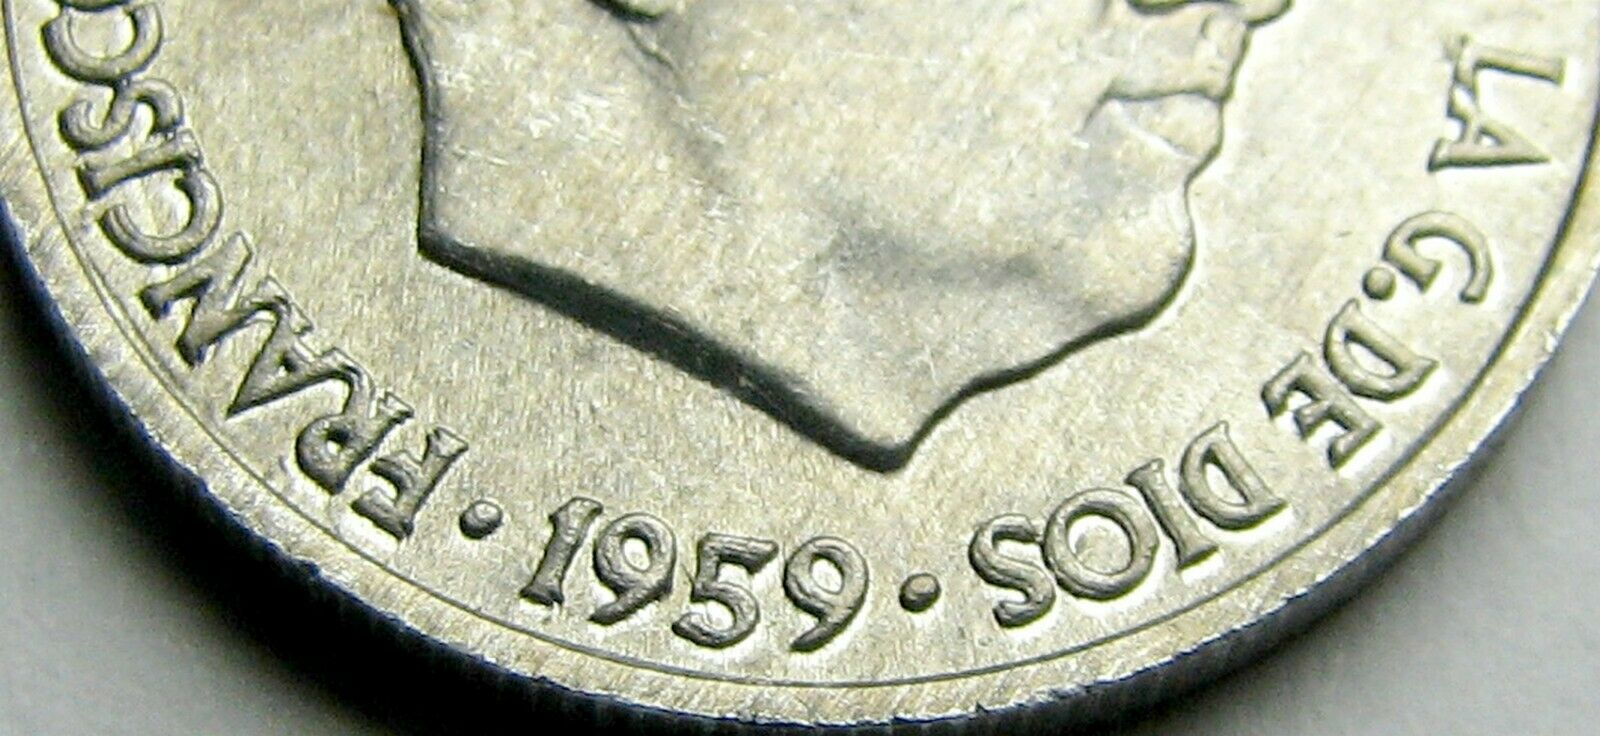 Spain 10 Centimos - 1959 - Very Strong Doubled Die Obverse - Bu